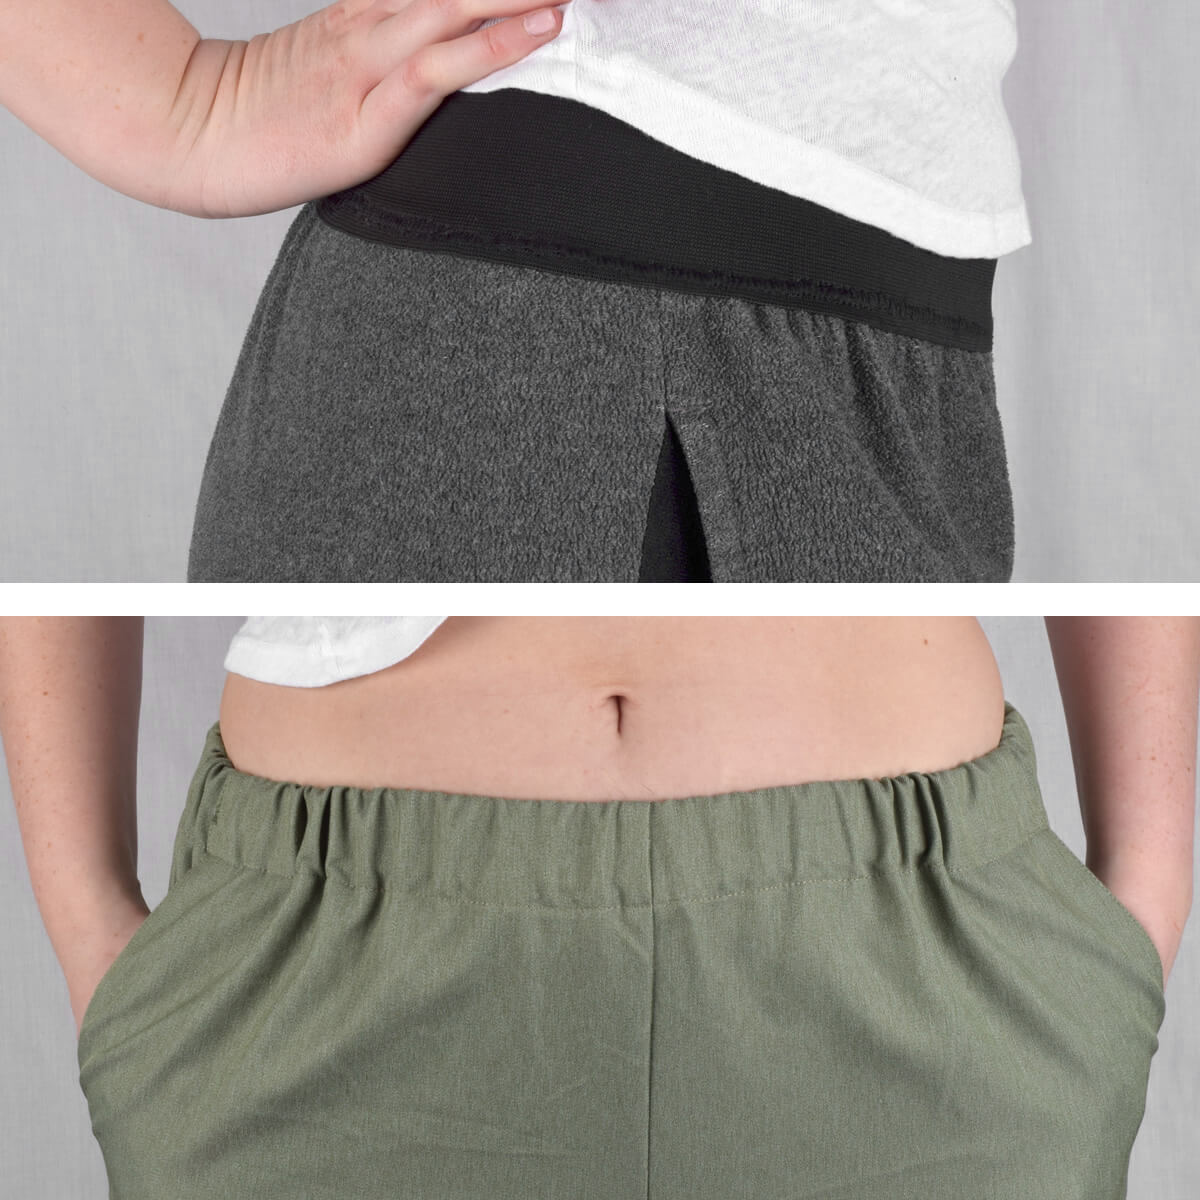 How to Sew an Exposed Elastic Waistband 